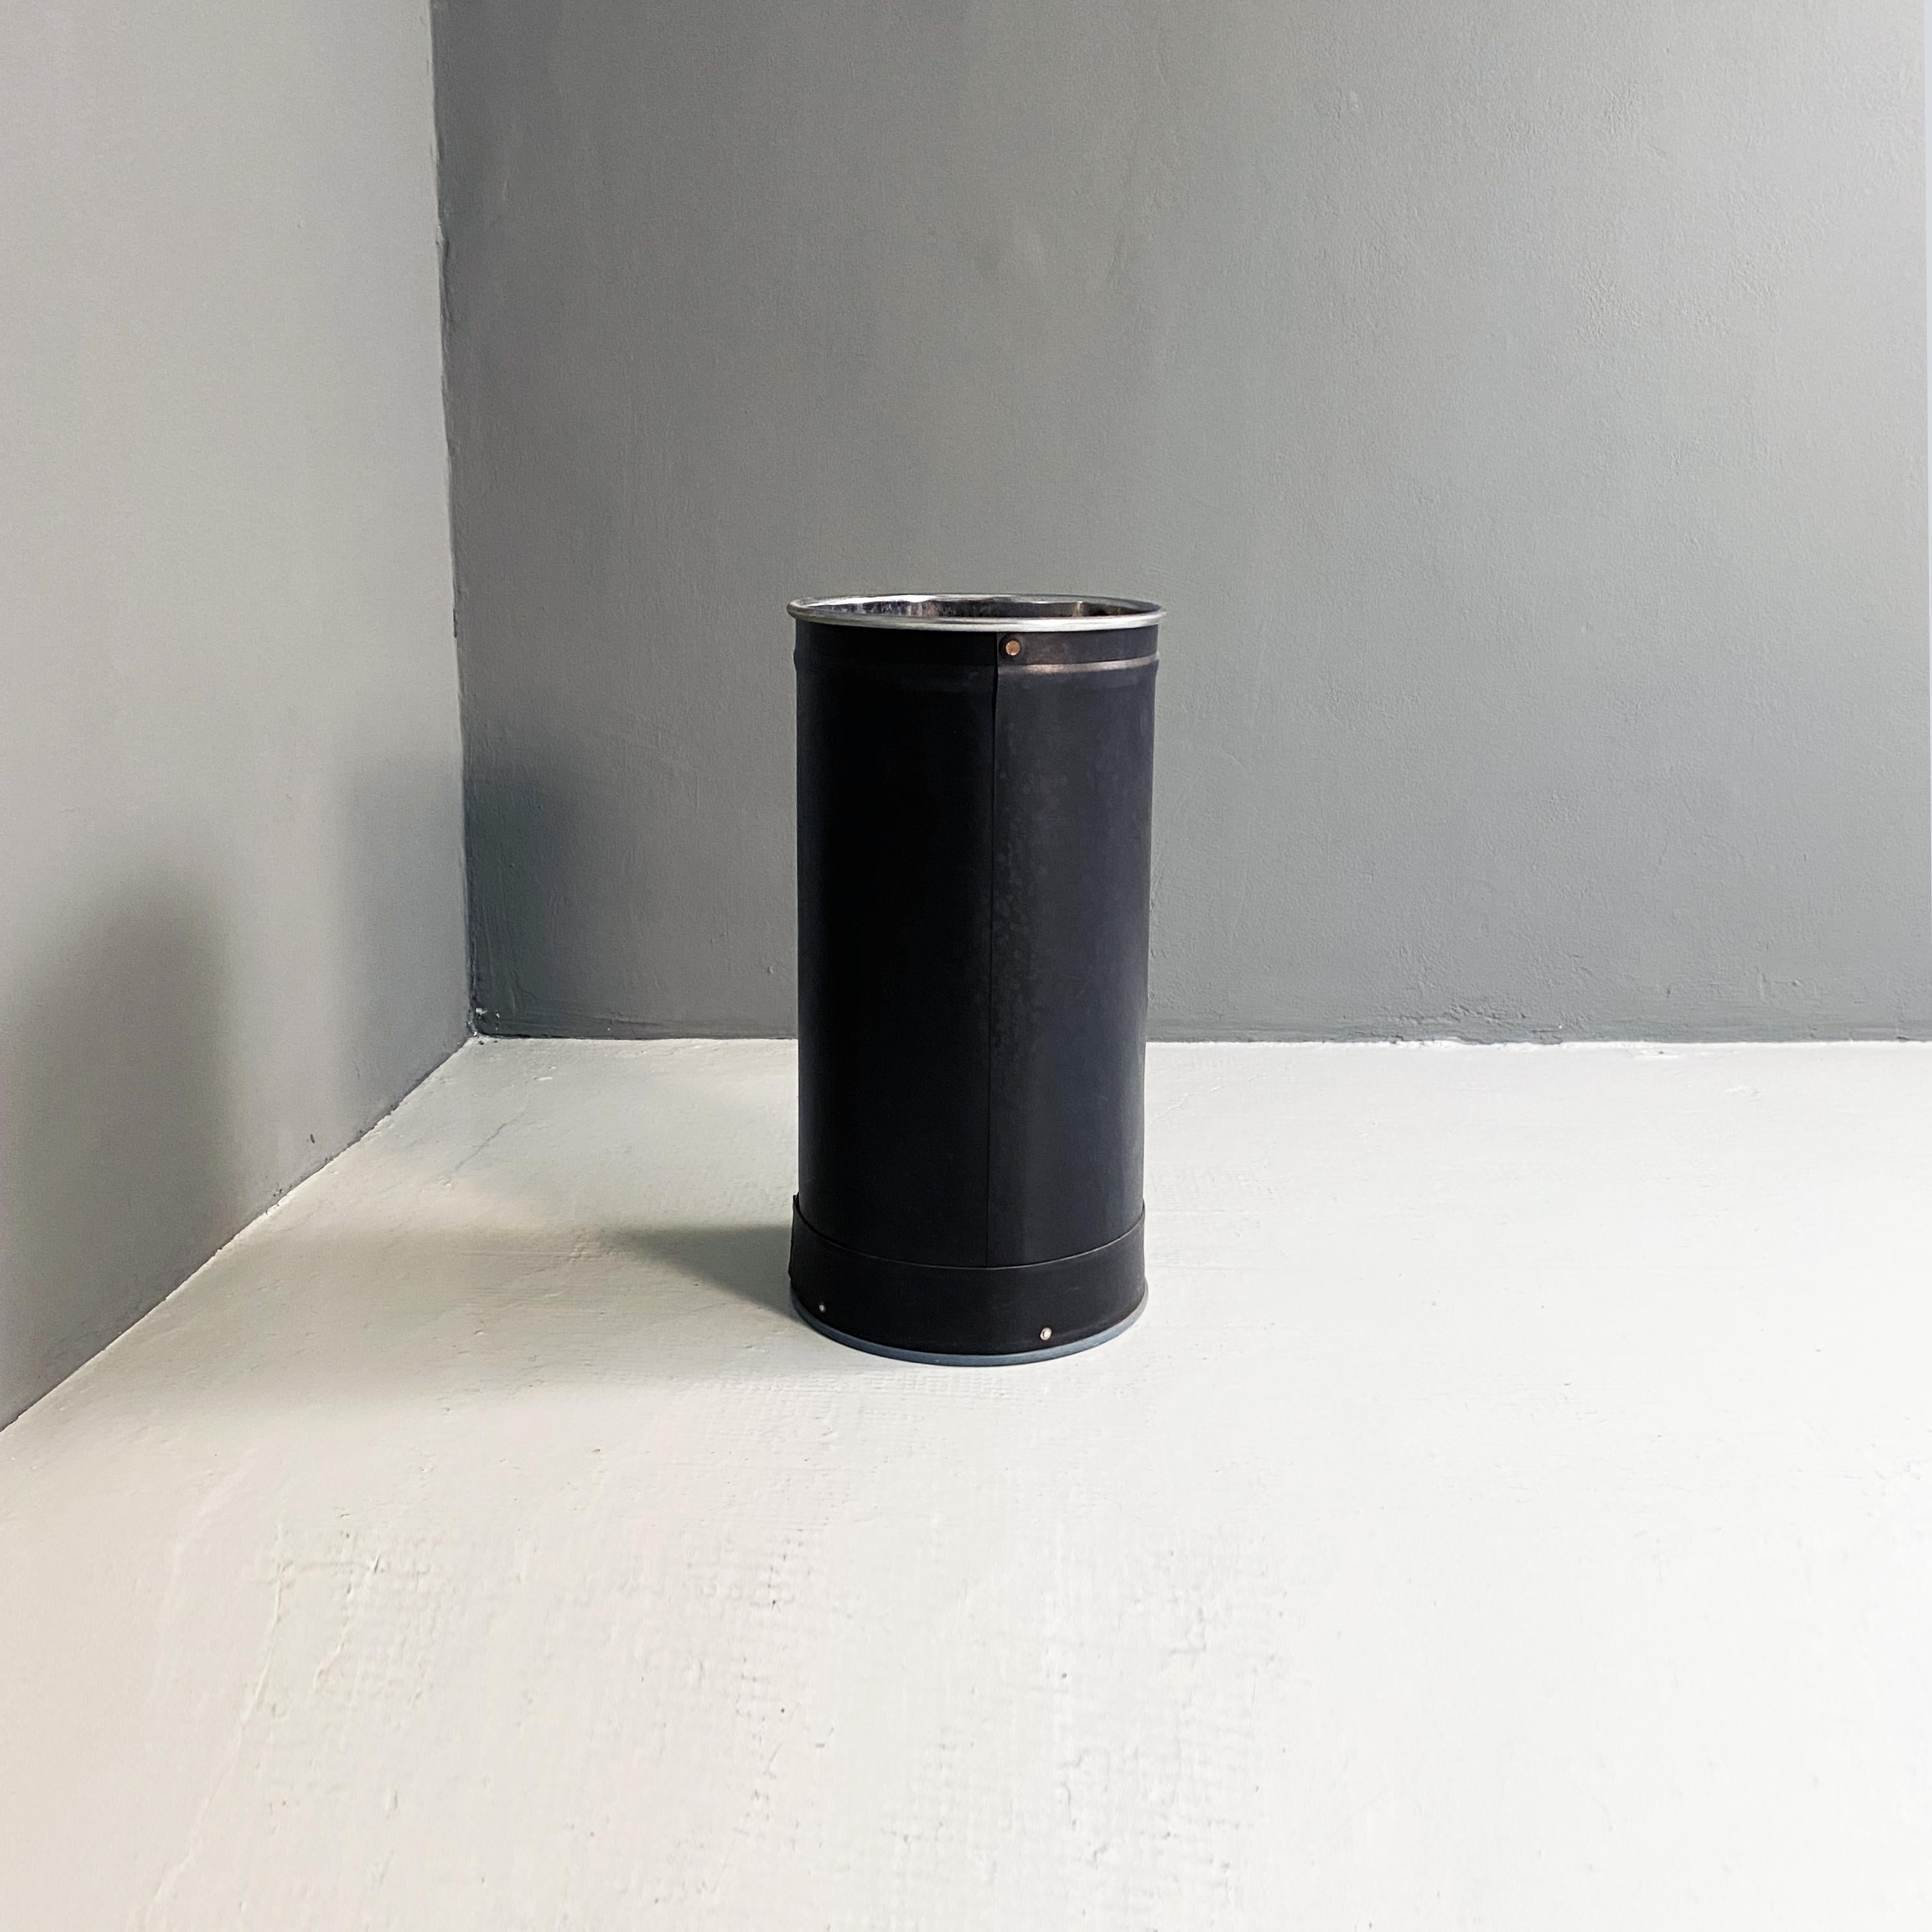 Mid-Century Modern Industrial black plastic metal bin by Victor, 1960s
Industrial black plastic and metal bin with structure covered in black plastic that can be used as an object holder, umbrella Stand and container. Marked Victor from the 1960s